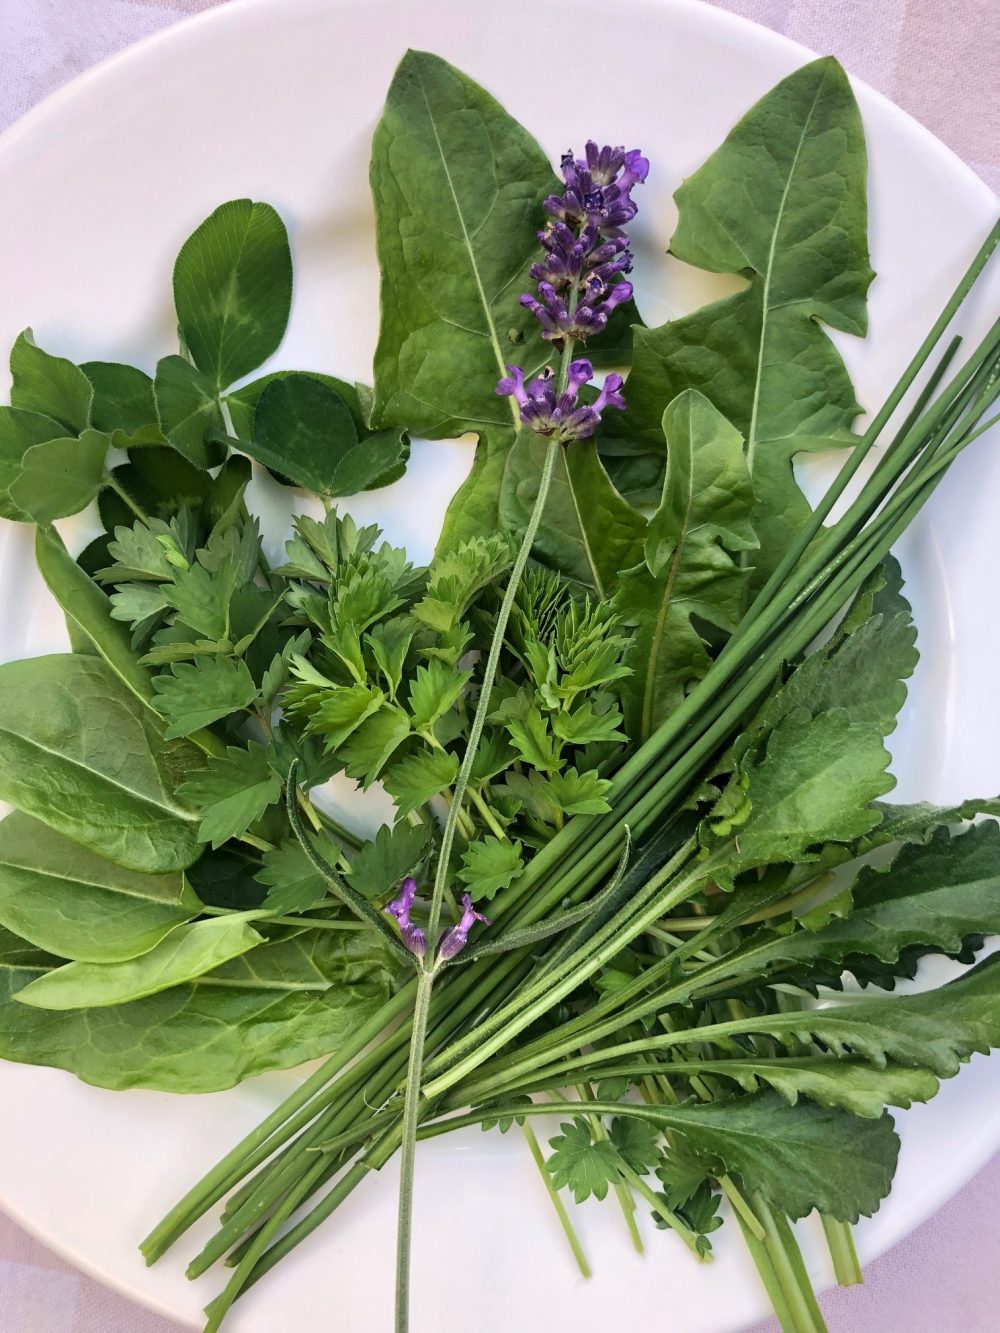 Wild Salad: Why should we Eat Foraged Greens?